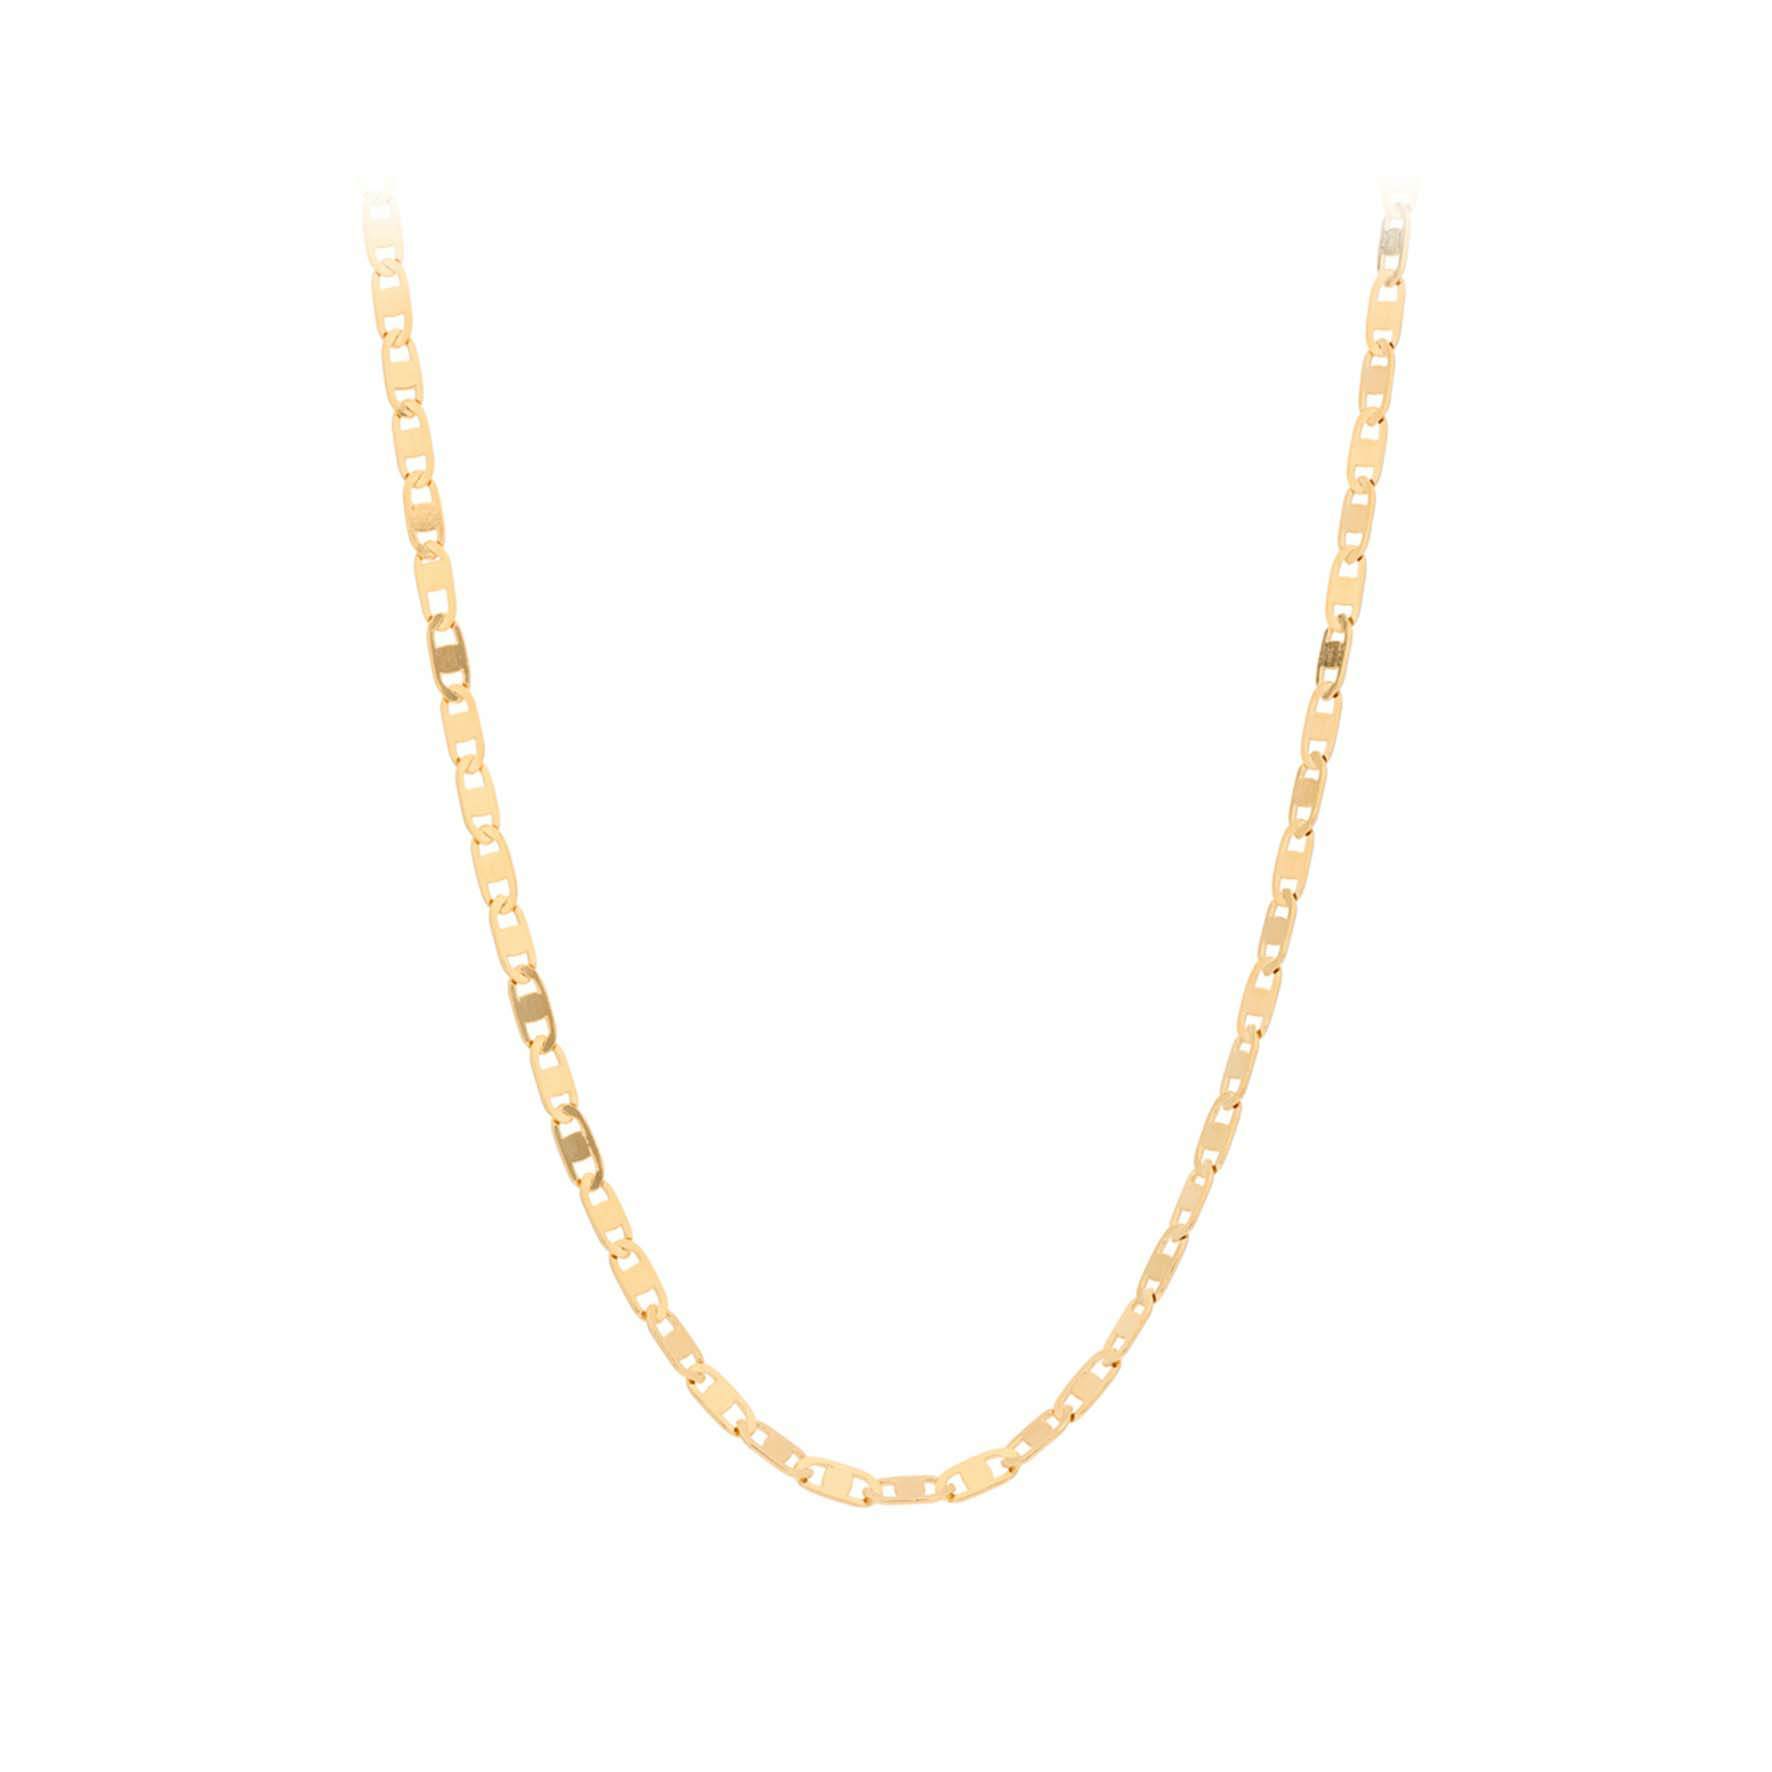 Eileen Necklace from Pernille Corydon in Goldplated-Silver Sterling 925